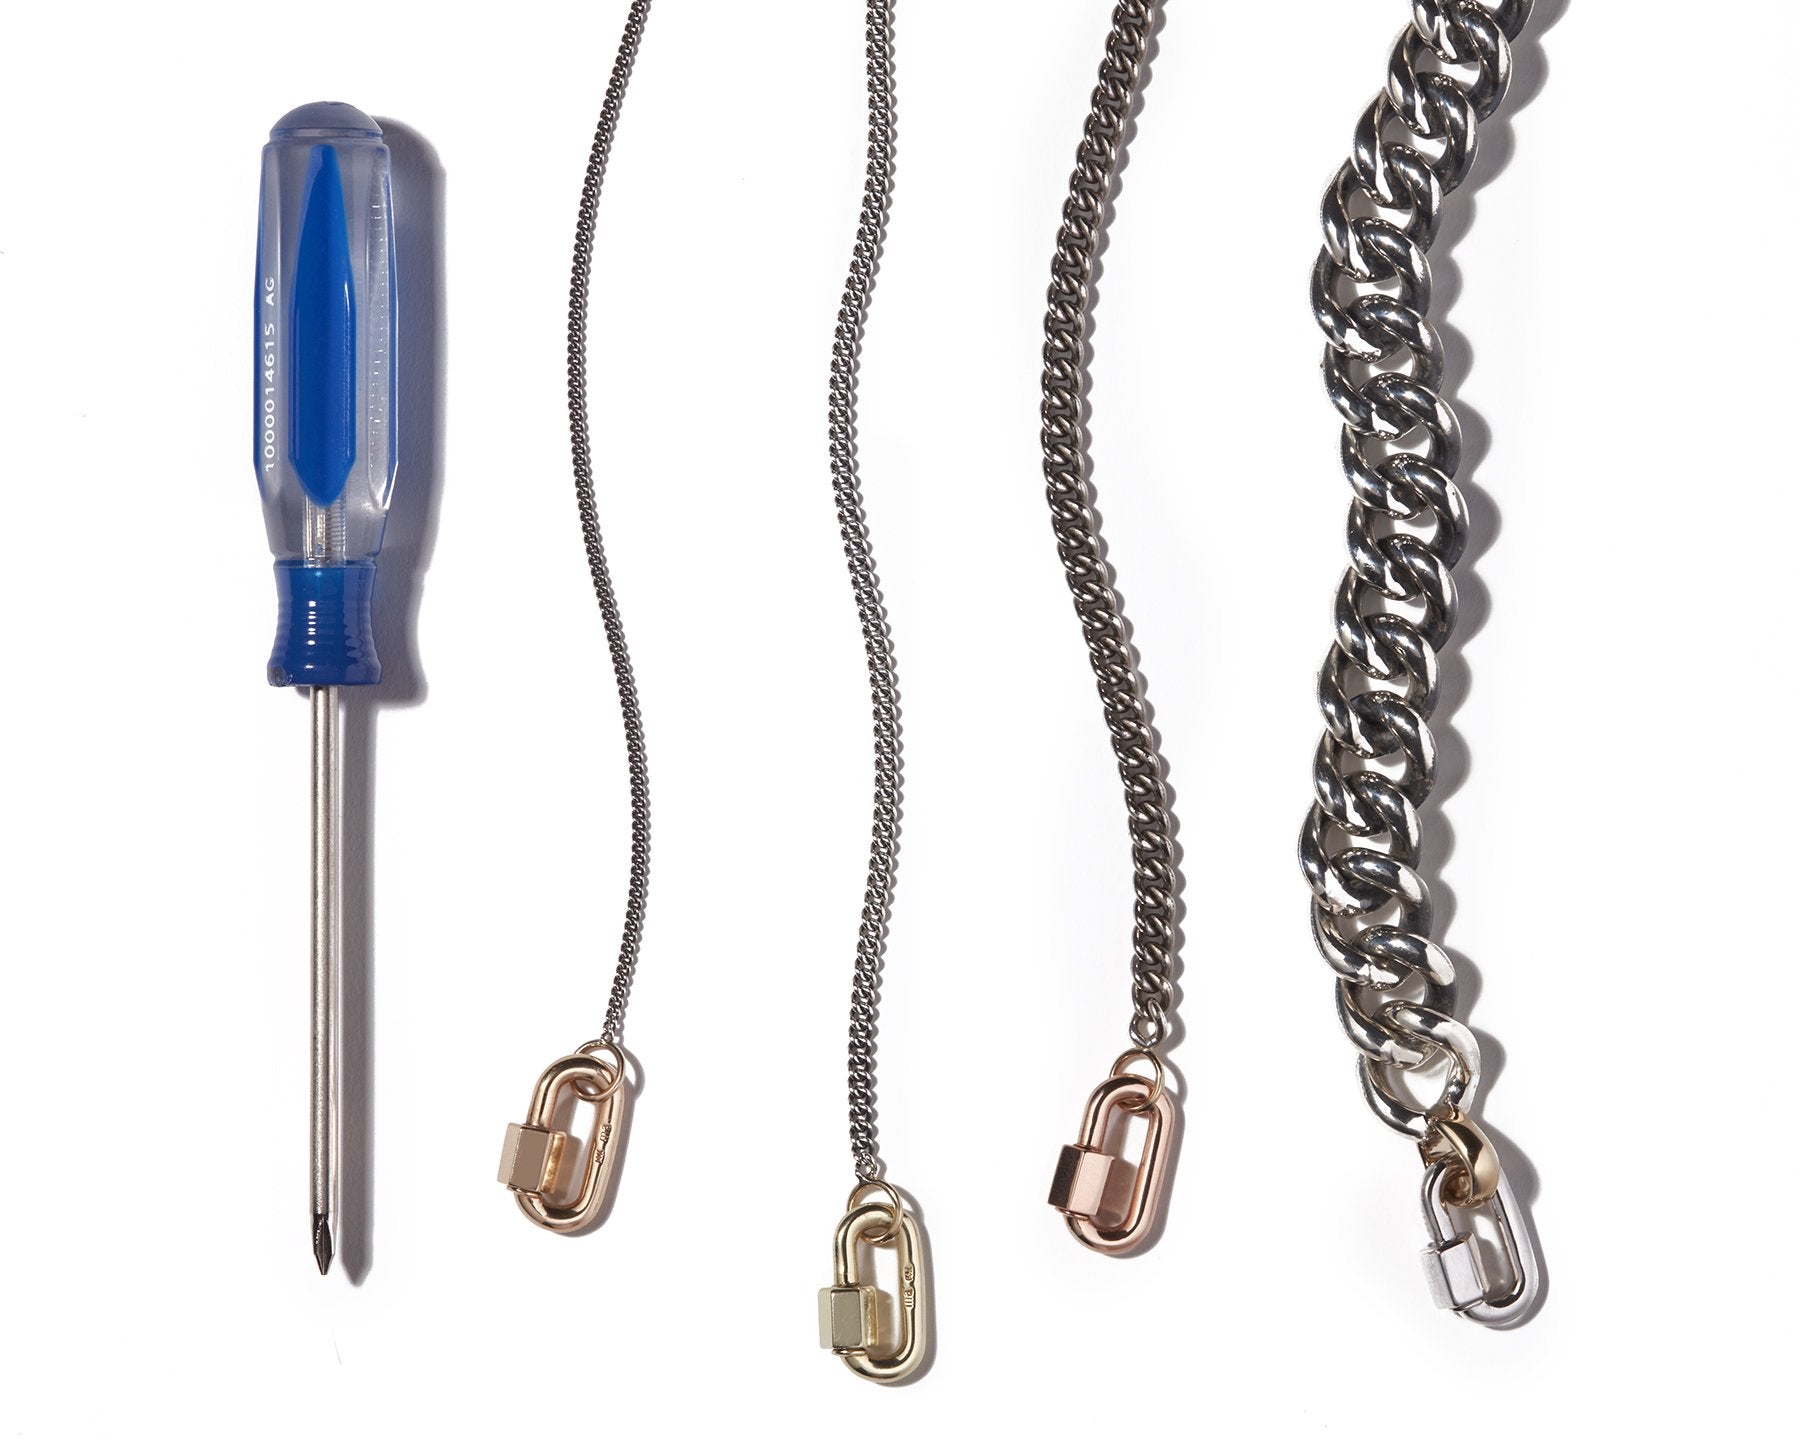 Four curb chains of different thicknesses with lock charms lined up next to each other alongside blue screwdriver